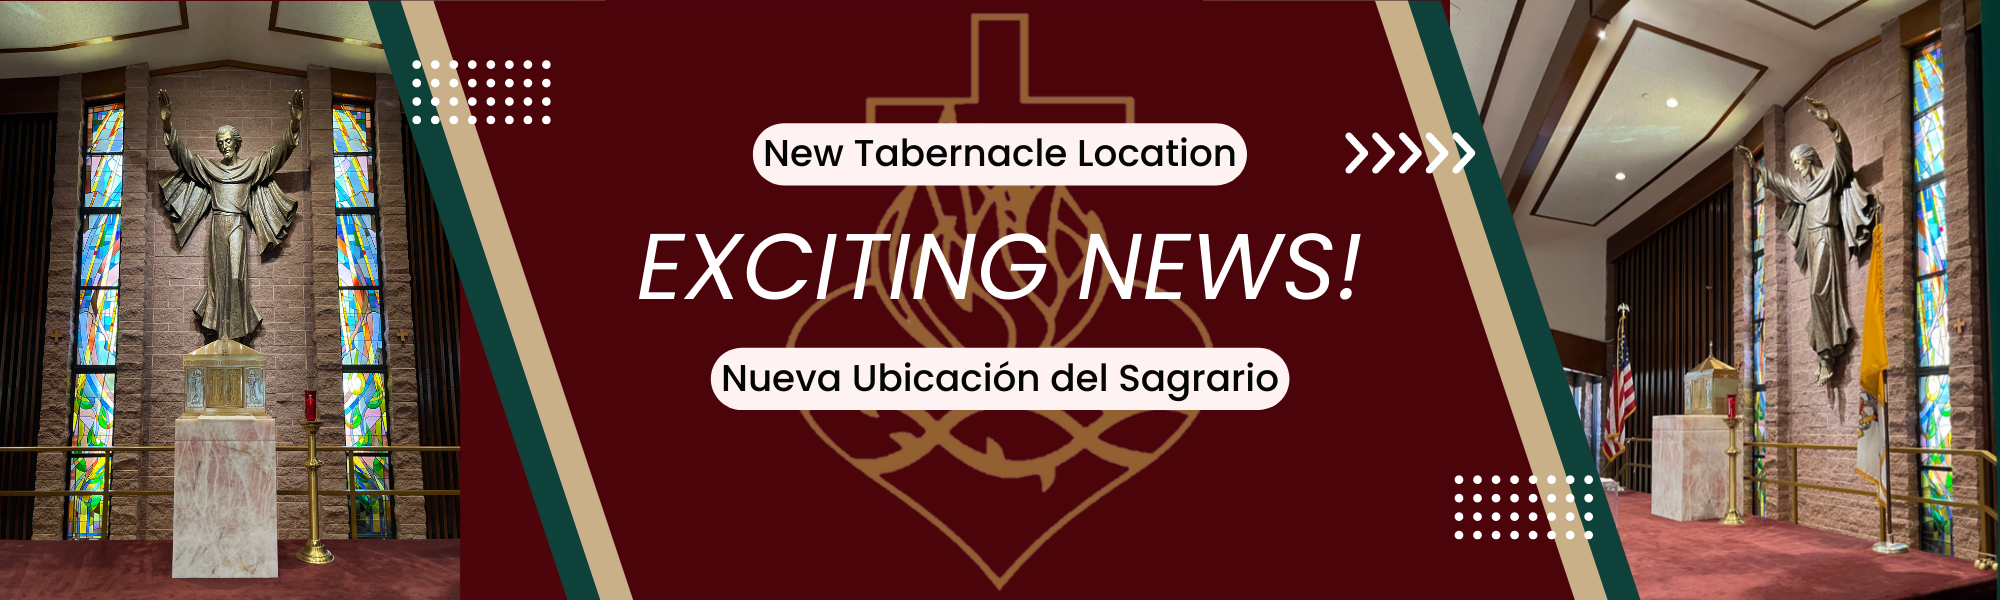 new tabernacle location